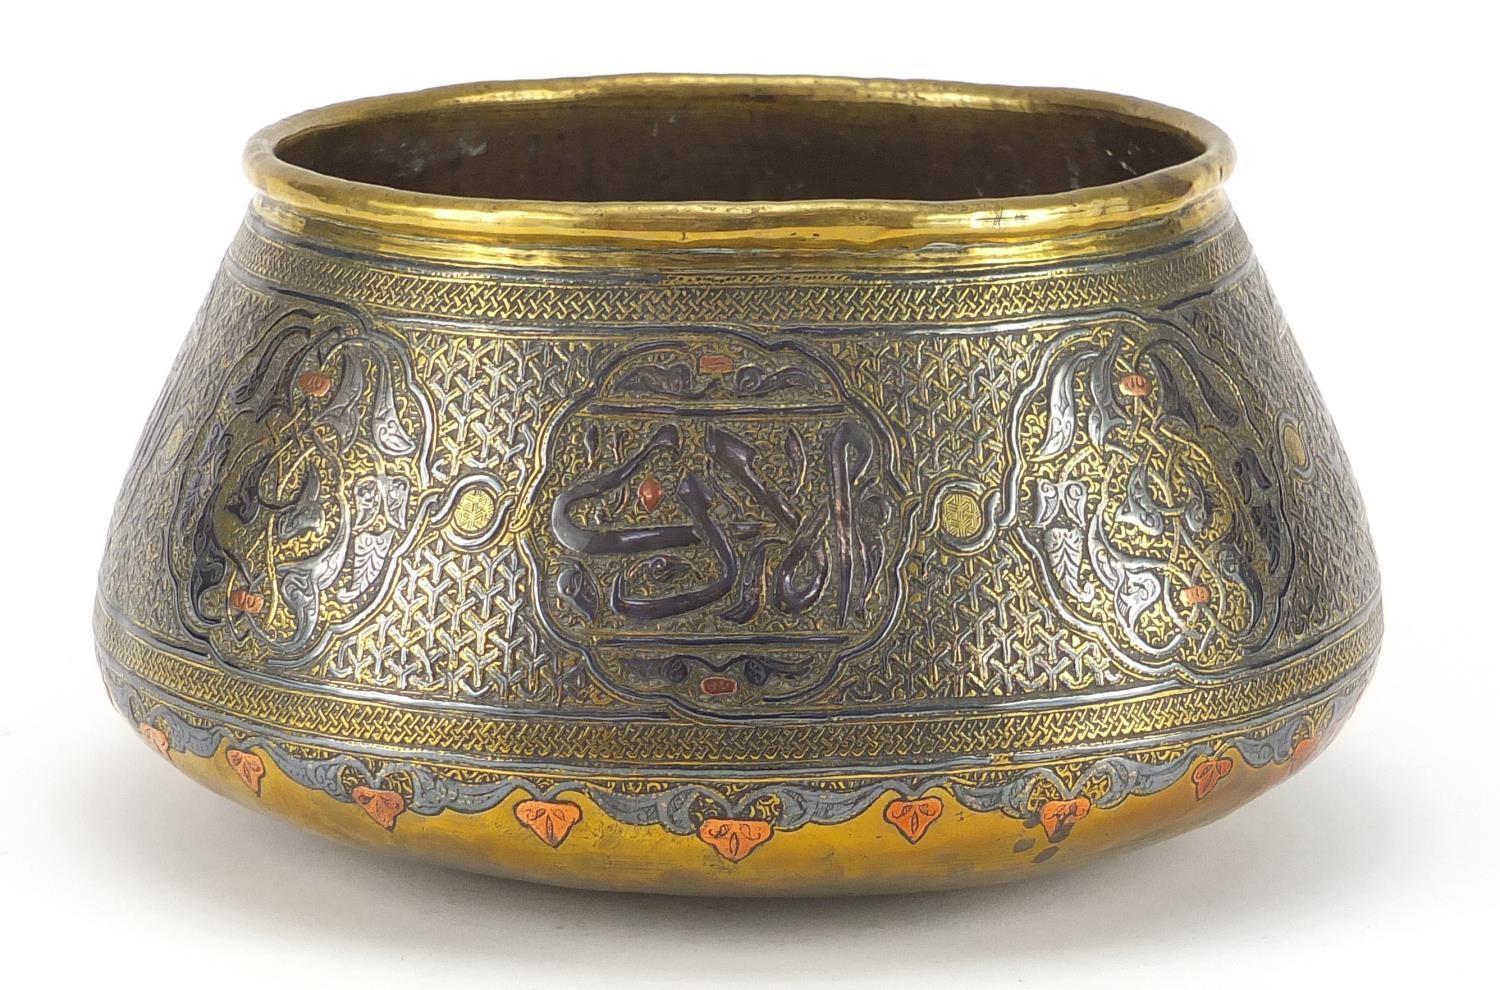 Cairoware brass bowl with silver inlay decorated with script and floral motifs, 25cm in diameter : - Image 2 of 5